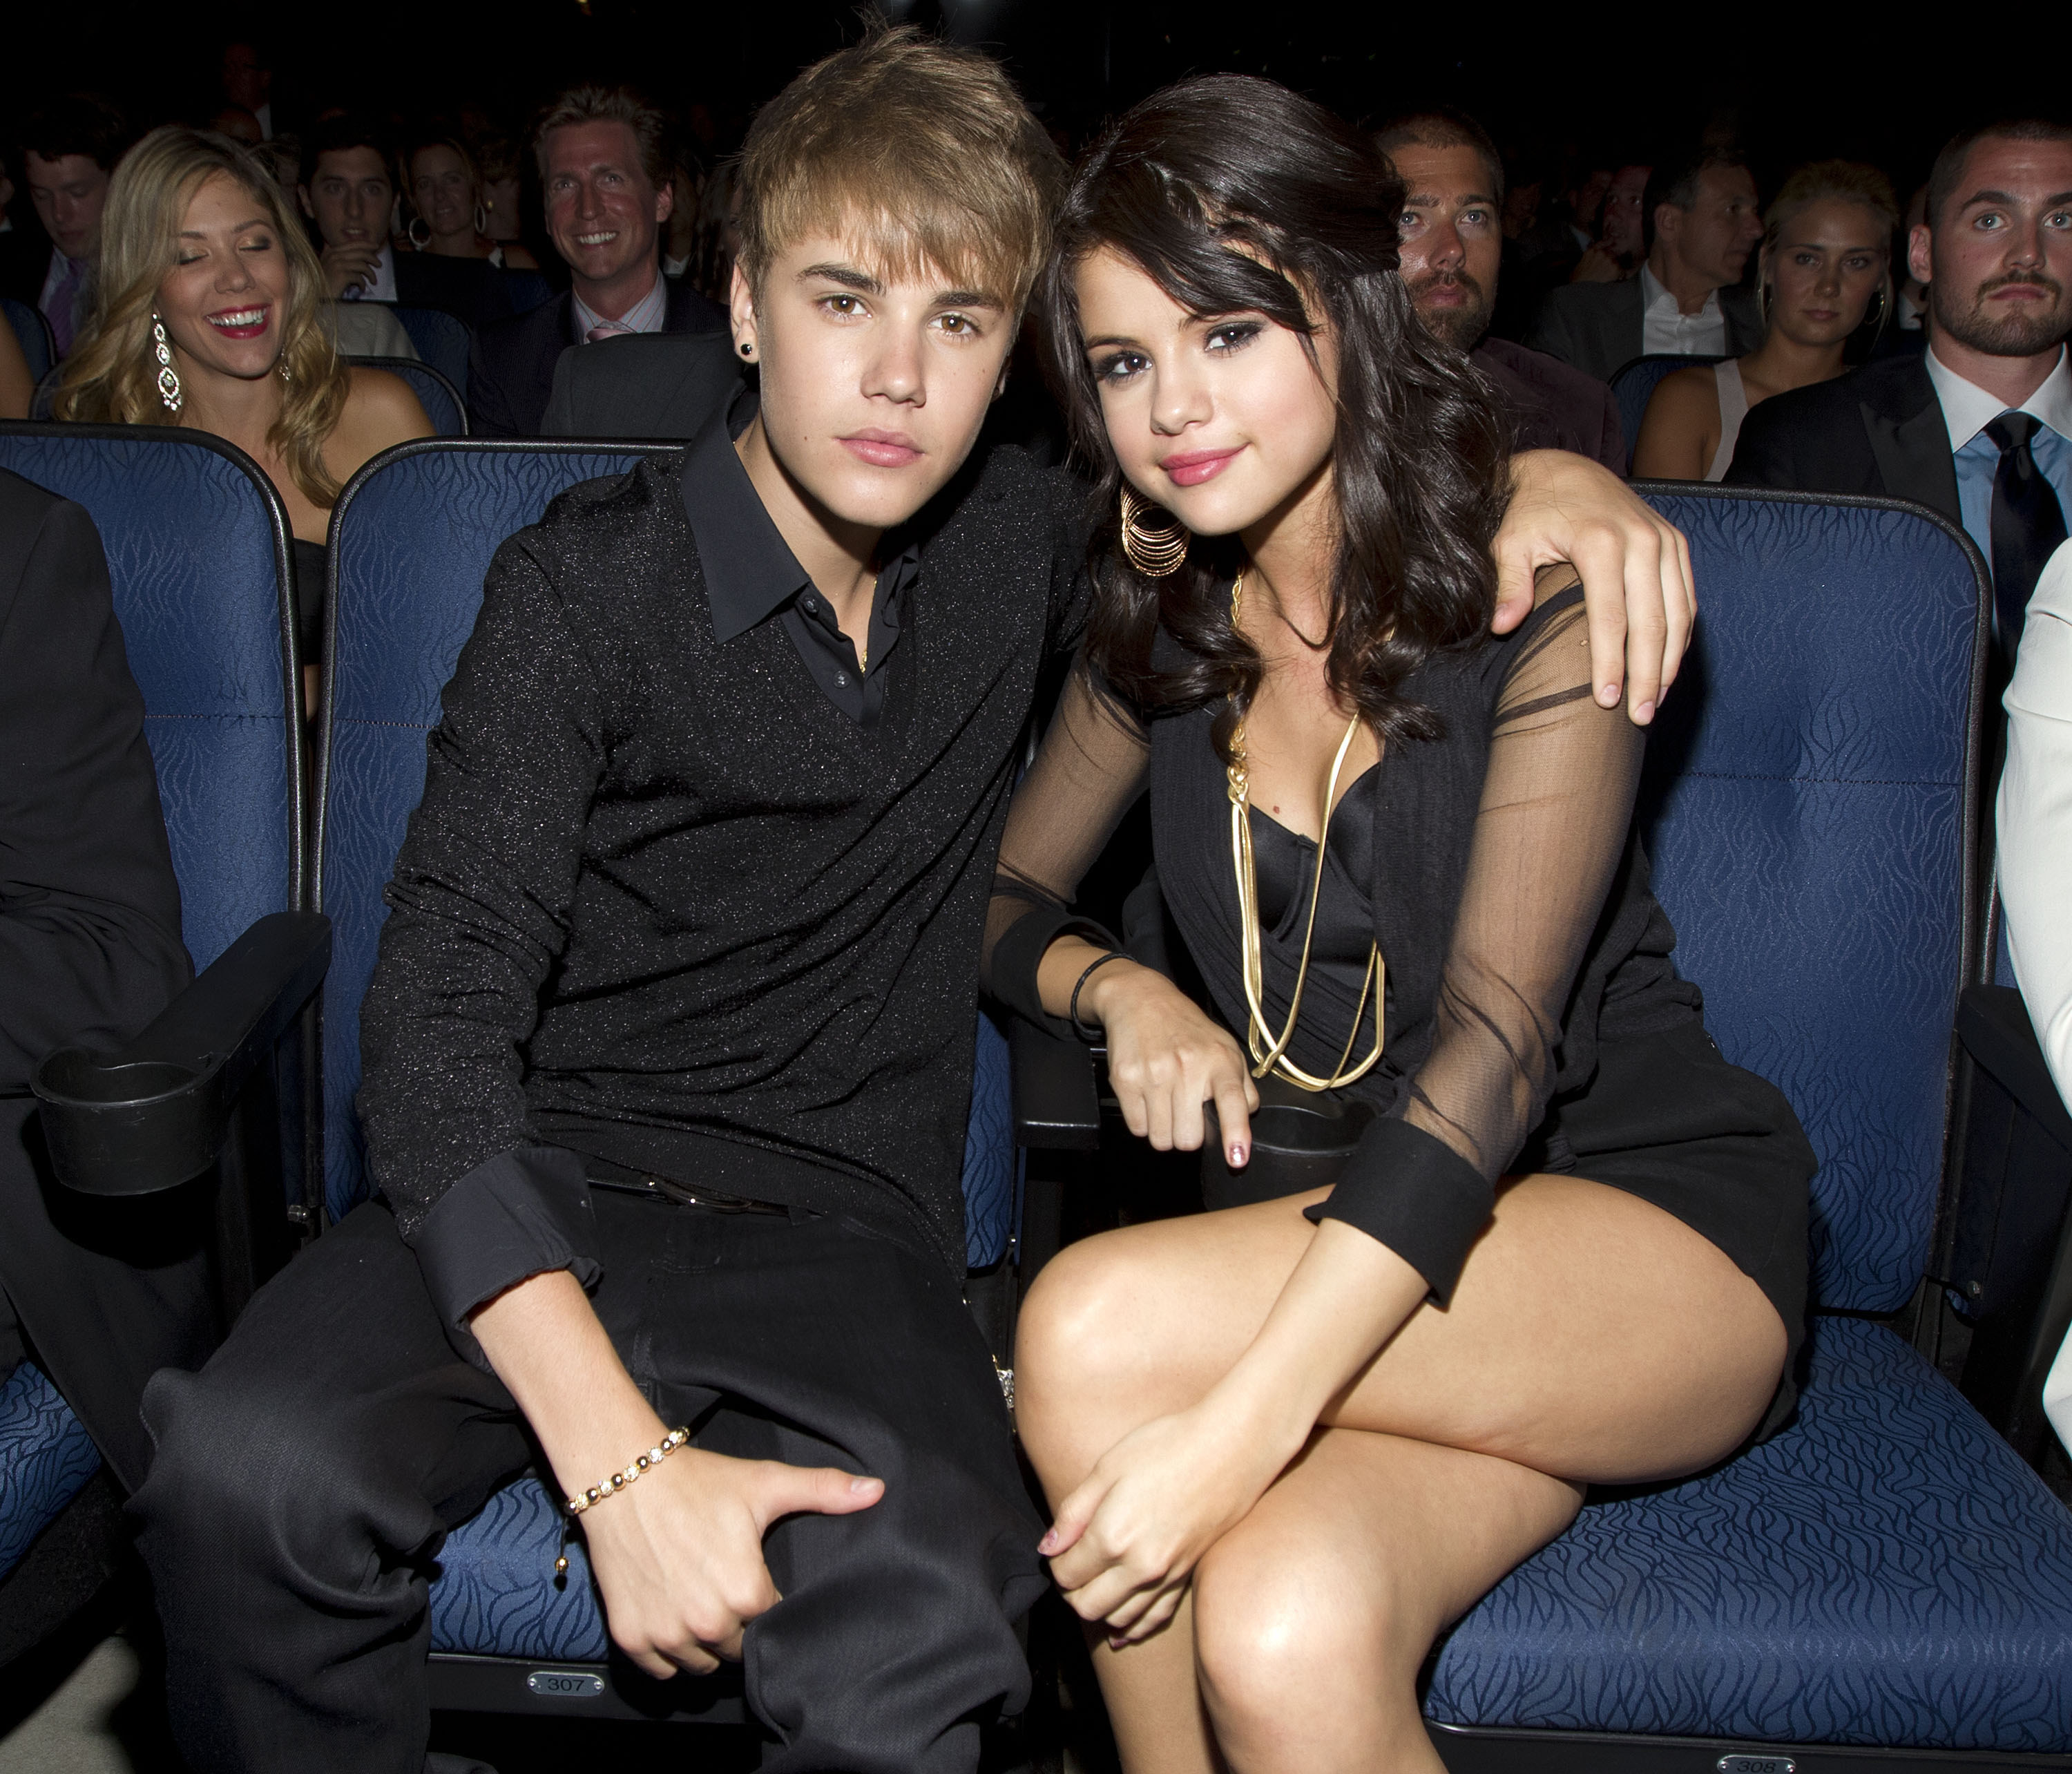 Justin Bieber and Selena Gomez pose for a photo at the  ESPY Awards on July 13, 2011